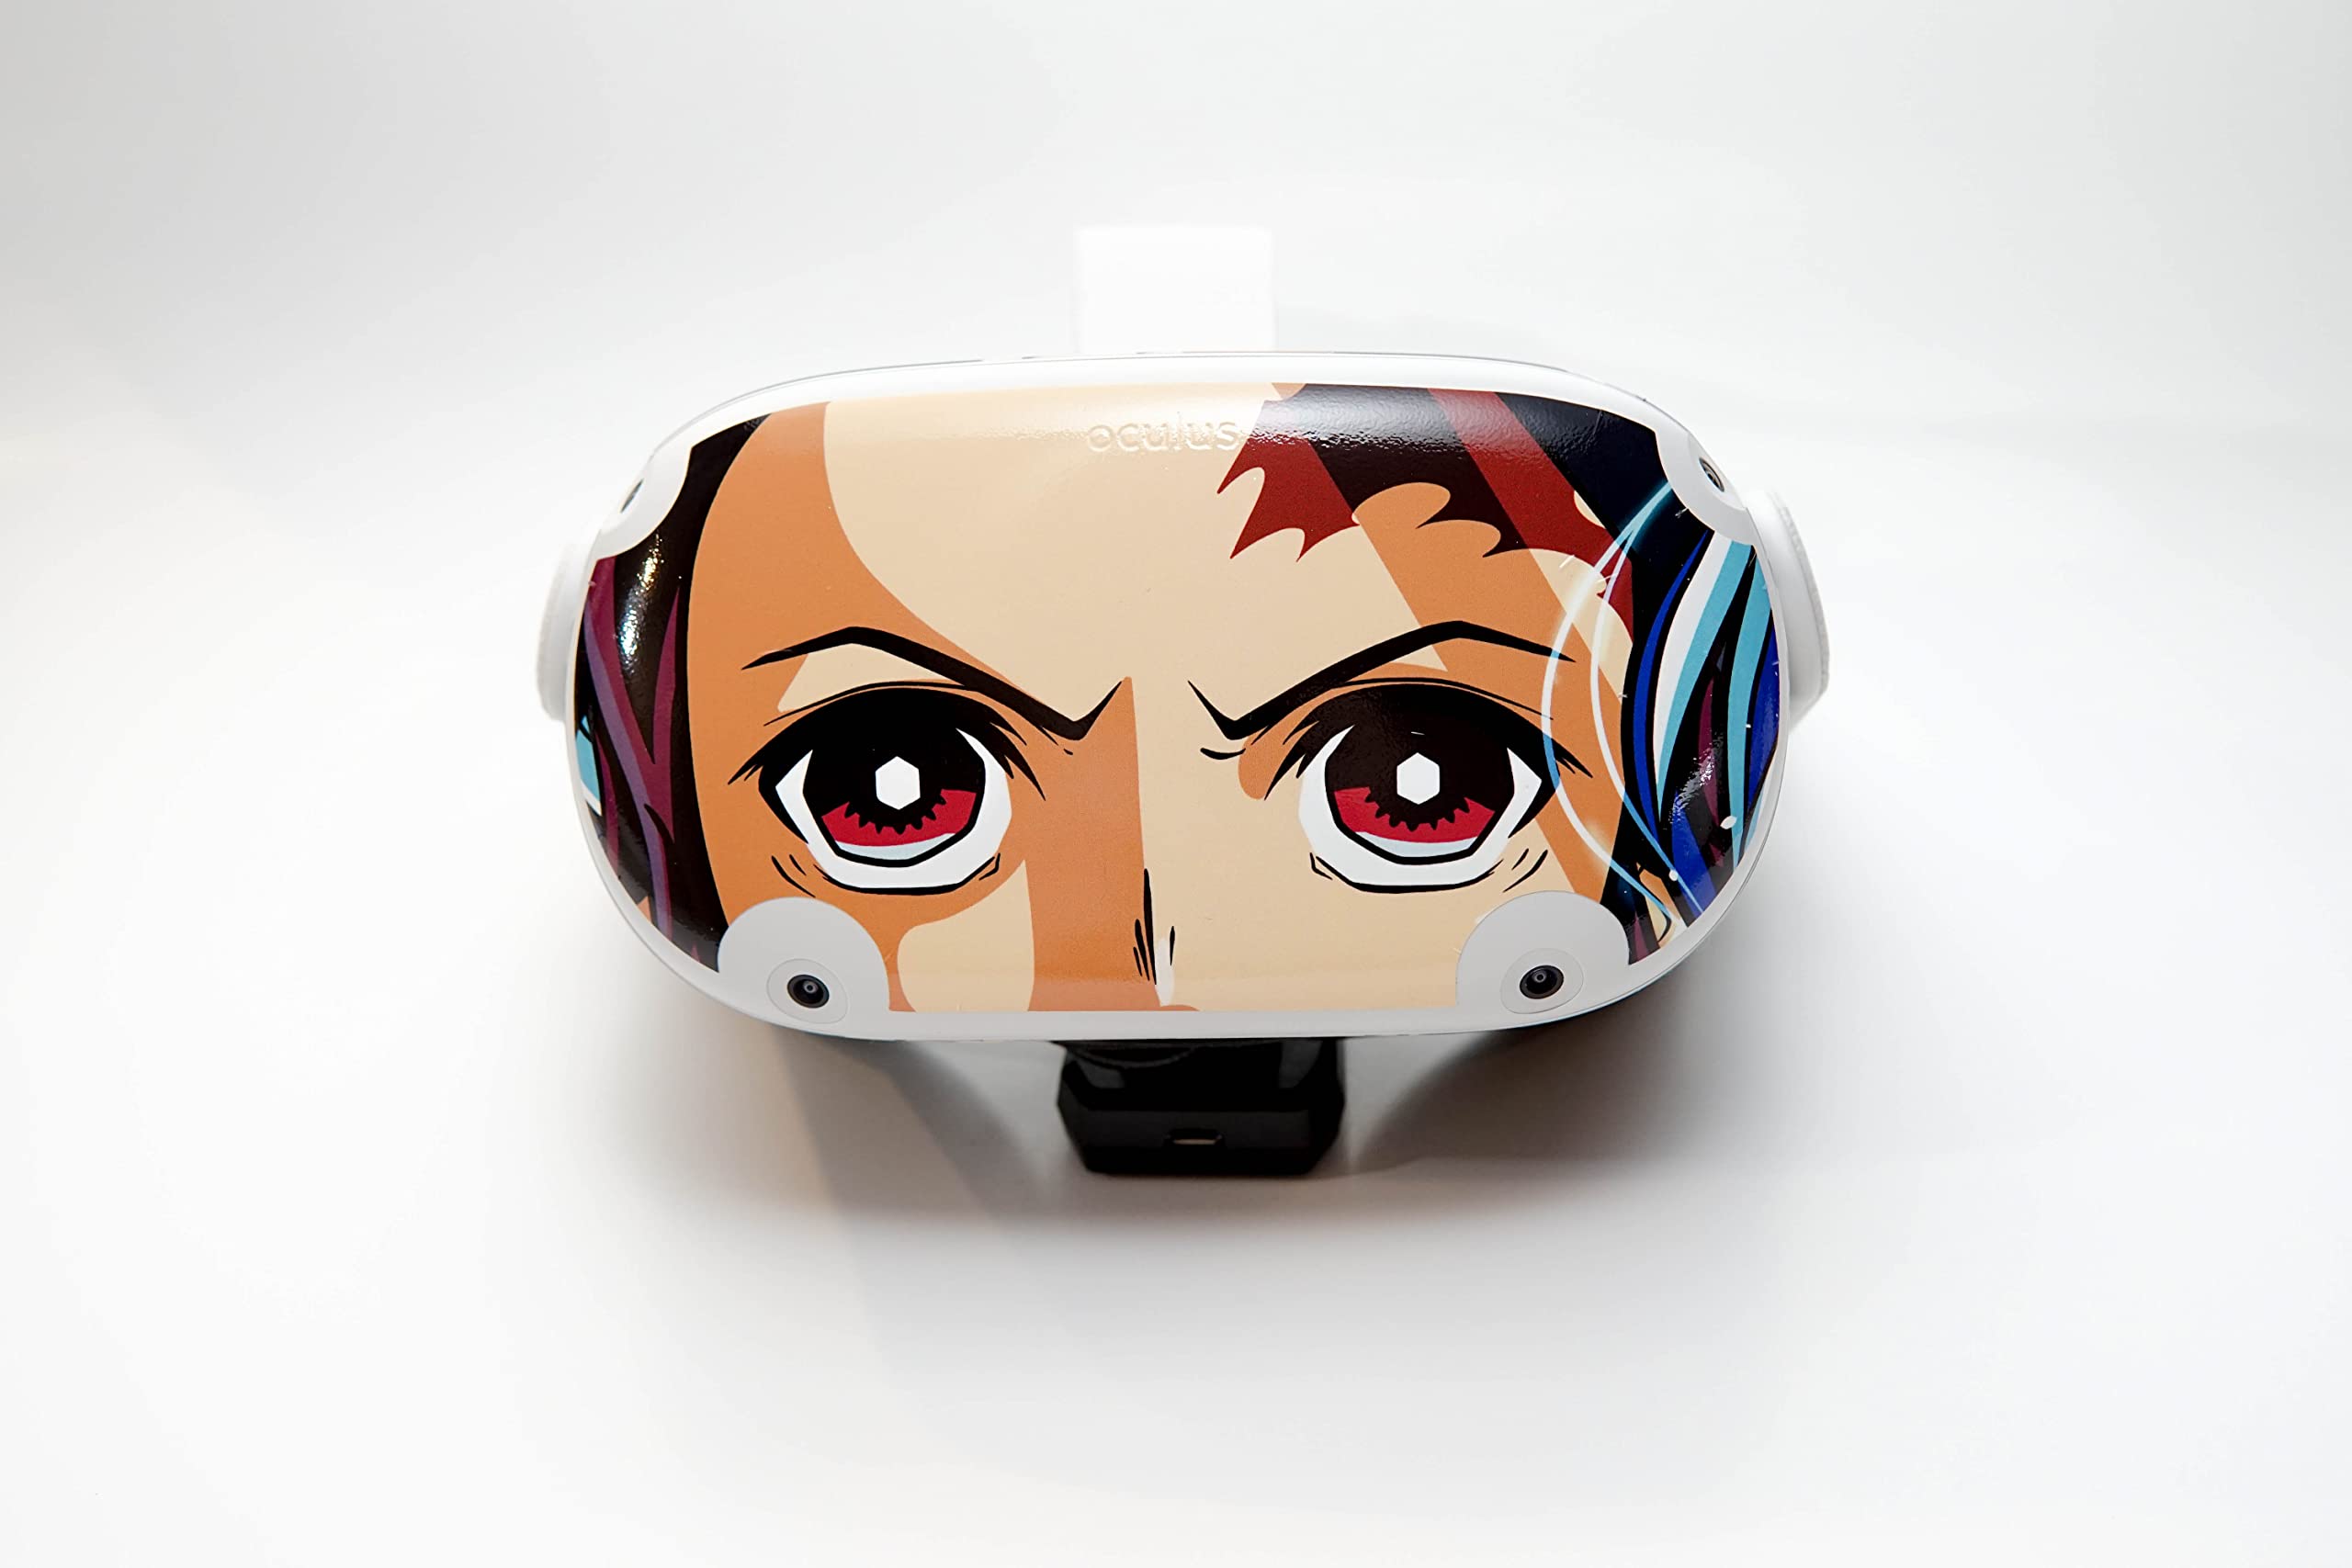 Water Breath Anime Eyes Skin Wrap for Oculus Quest 2 - VR Headset and 2 Controllers | Protective, Smooth, Laminated Vinyl with Strong Adhesive | Easy Installation and adjustability | Made in The USA